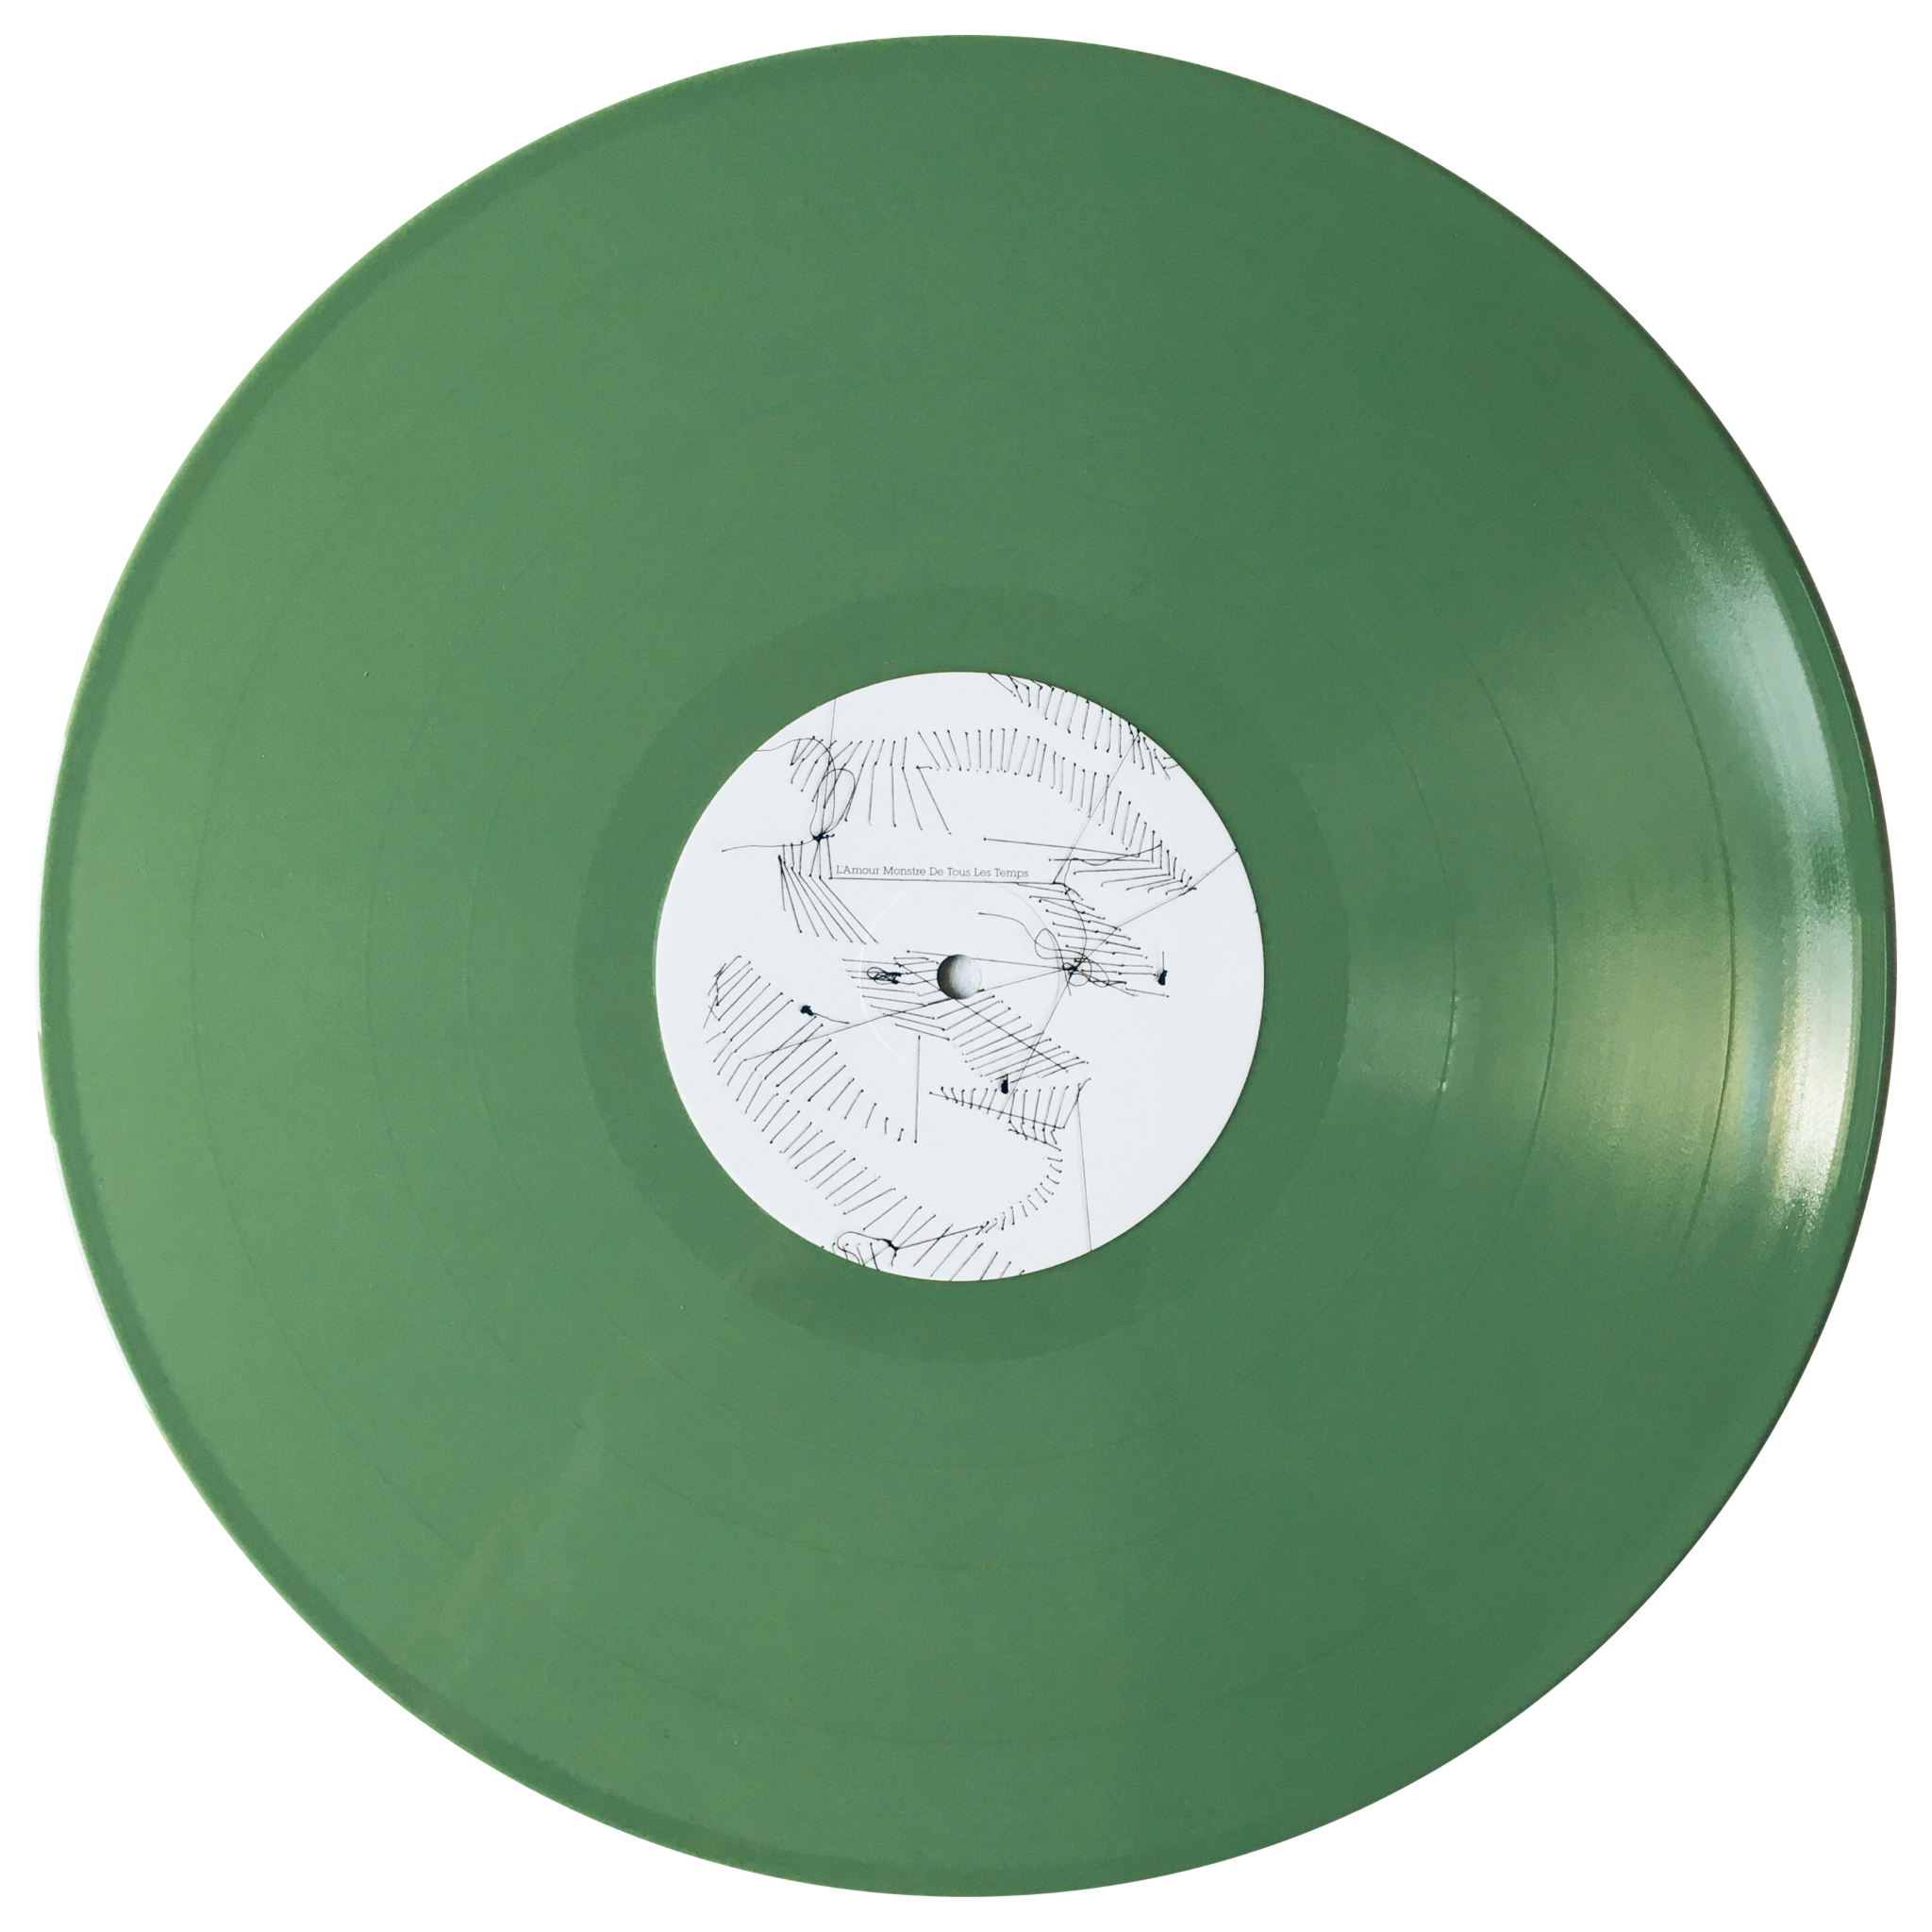 JULIE'S HAIRCUT In The Silence Electric (Ltd Green vinyl edition)